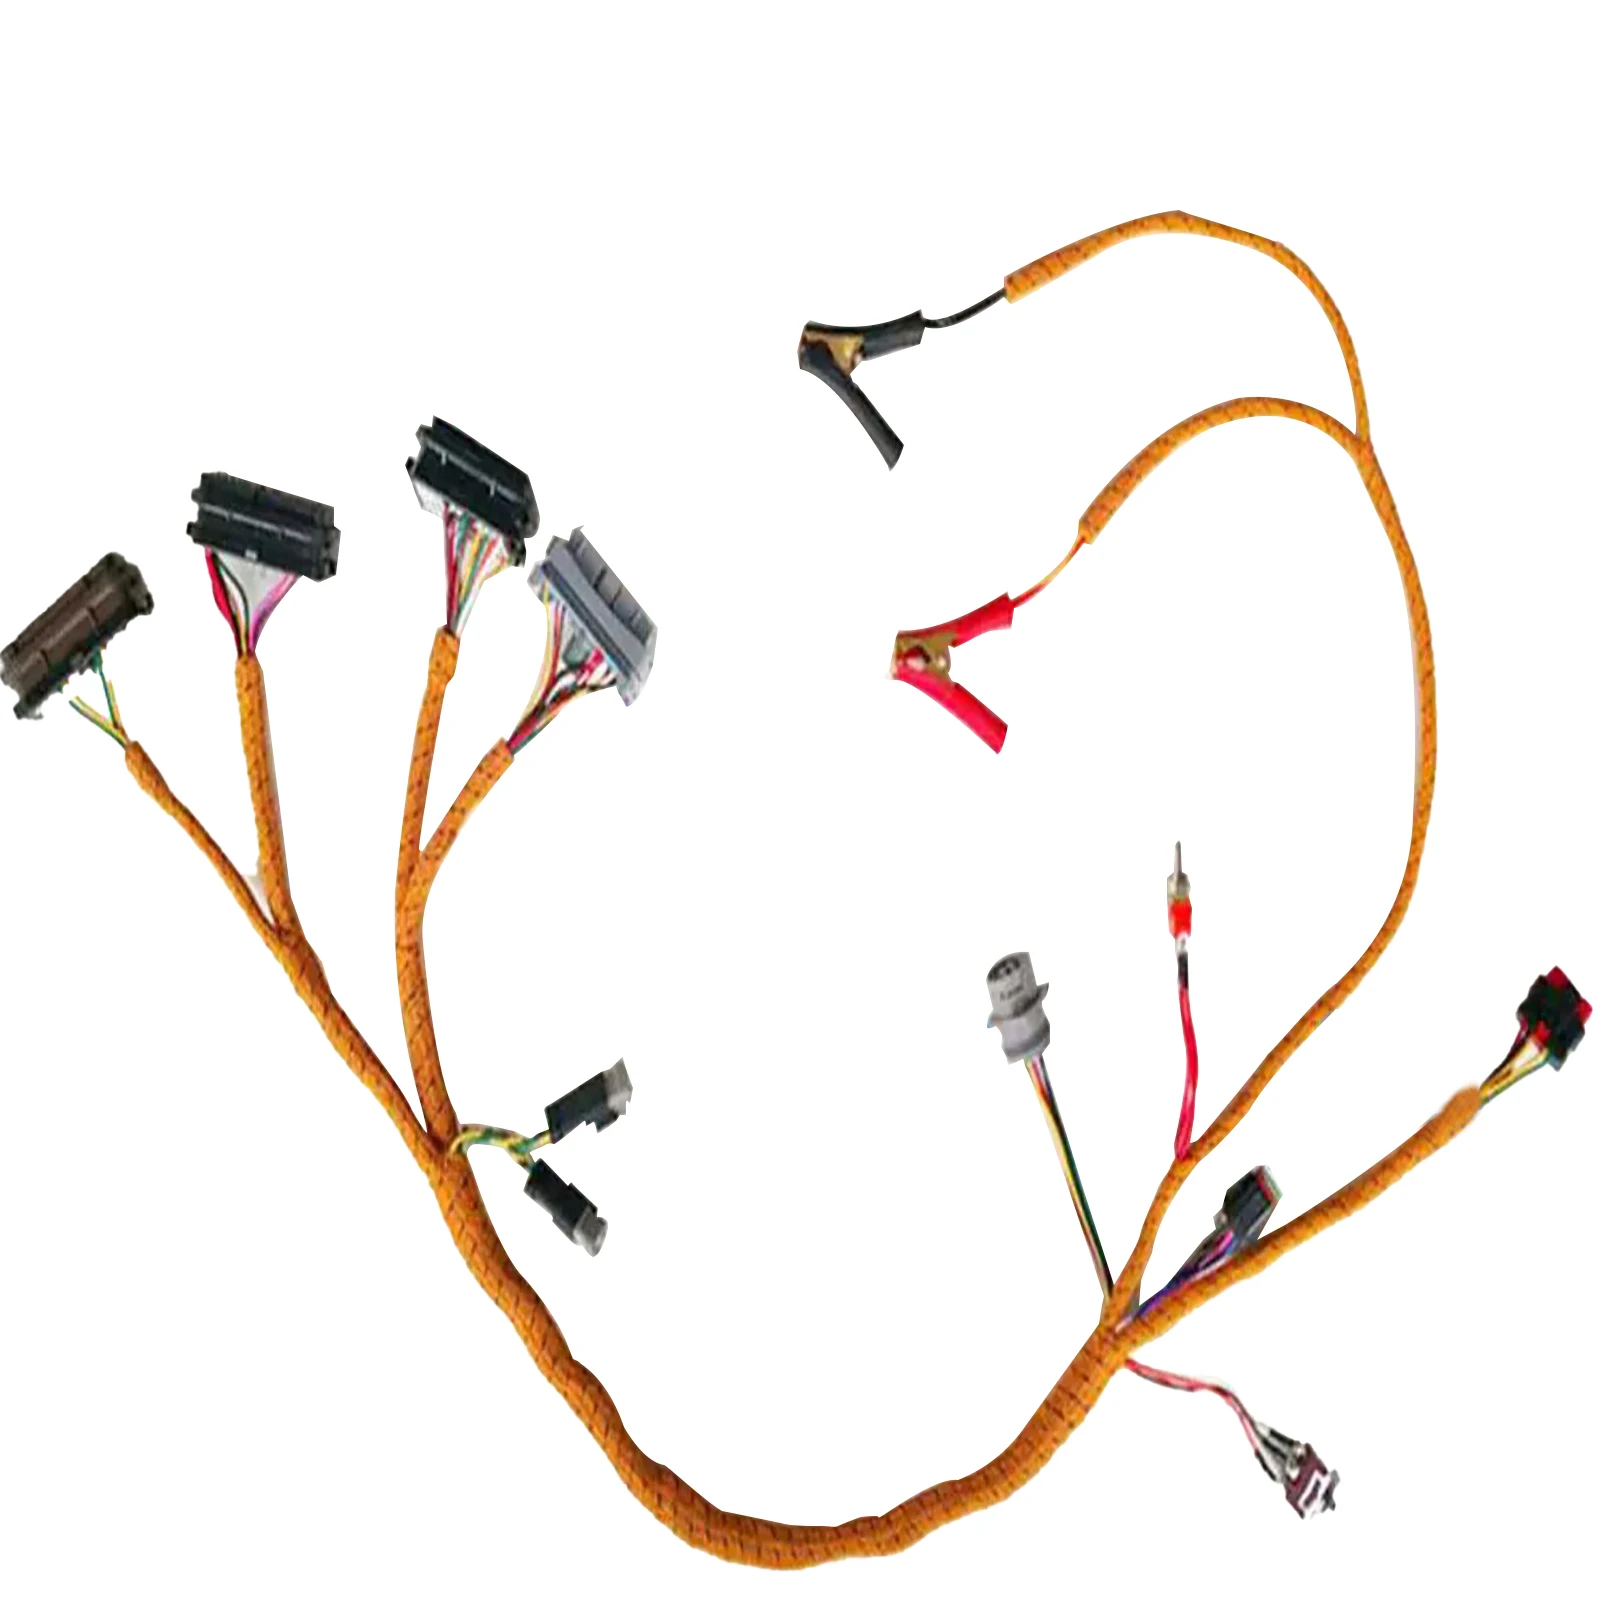 

New Inspection Wiring Harness Engine C6.4 C7 C9 C11 C15 Test Throttle Inspection Line For Caterpillar Excavator Parts